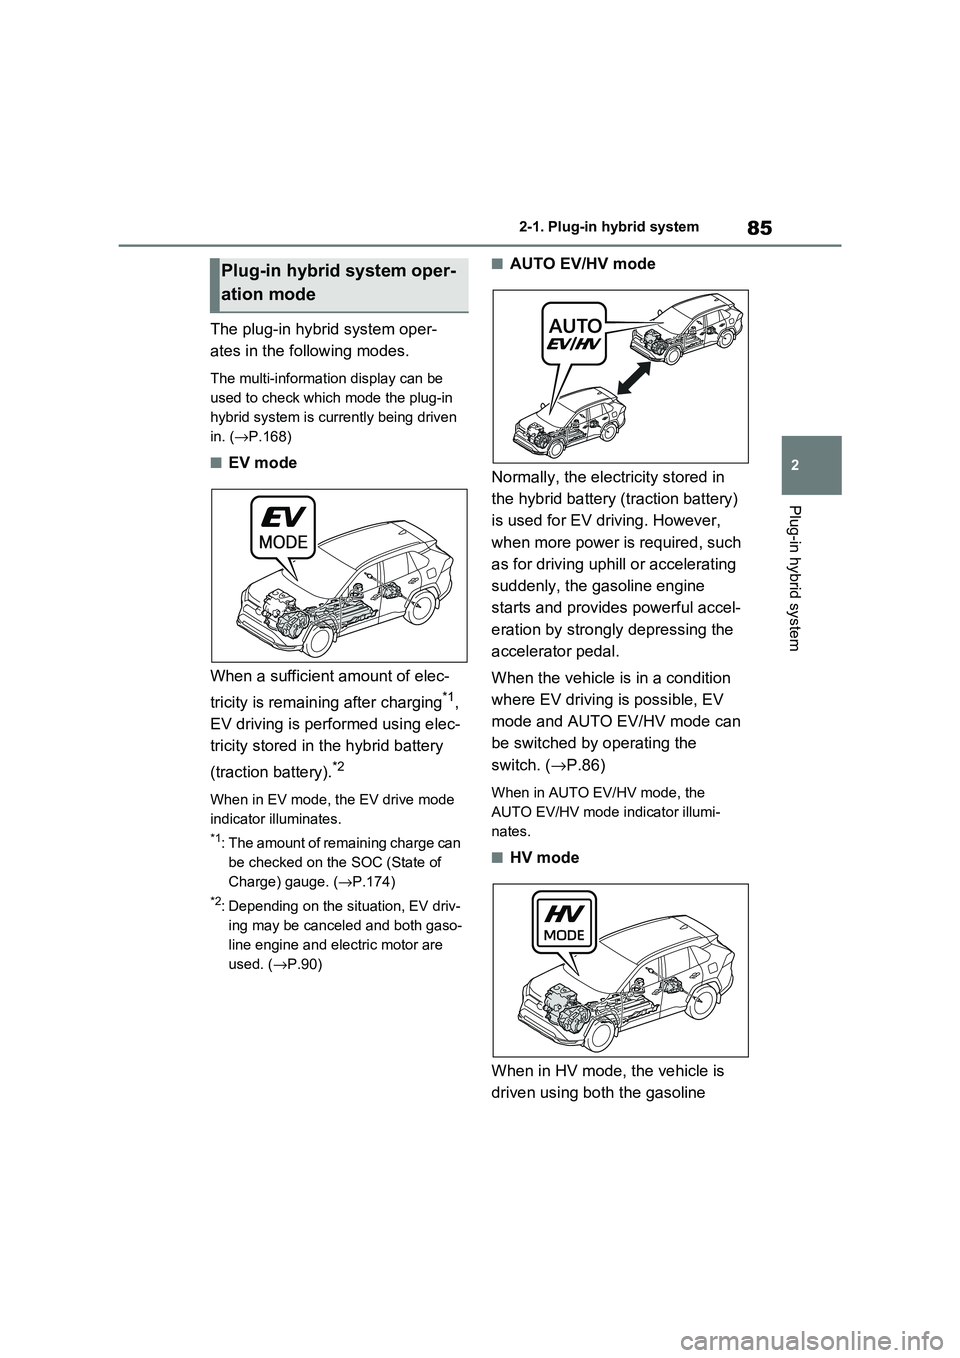 TOYOTA RAV4 PHEV 2021  Owners Manual 85
2 
2-1. Plug-in hybrid system
Plug-in hybrid system
The plug-in hybrid system oper - 
ates in the following modes.
The multi-information display can be  
used to check which  mode the plug-in  
hyb